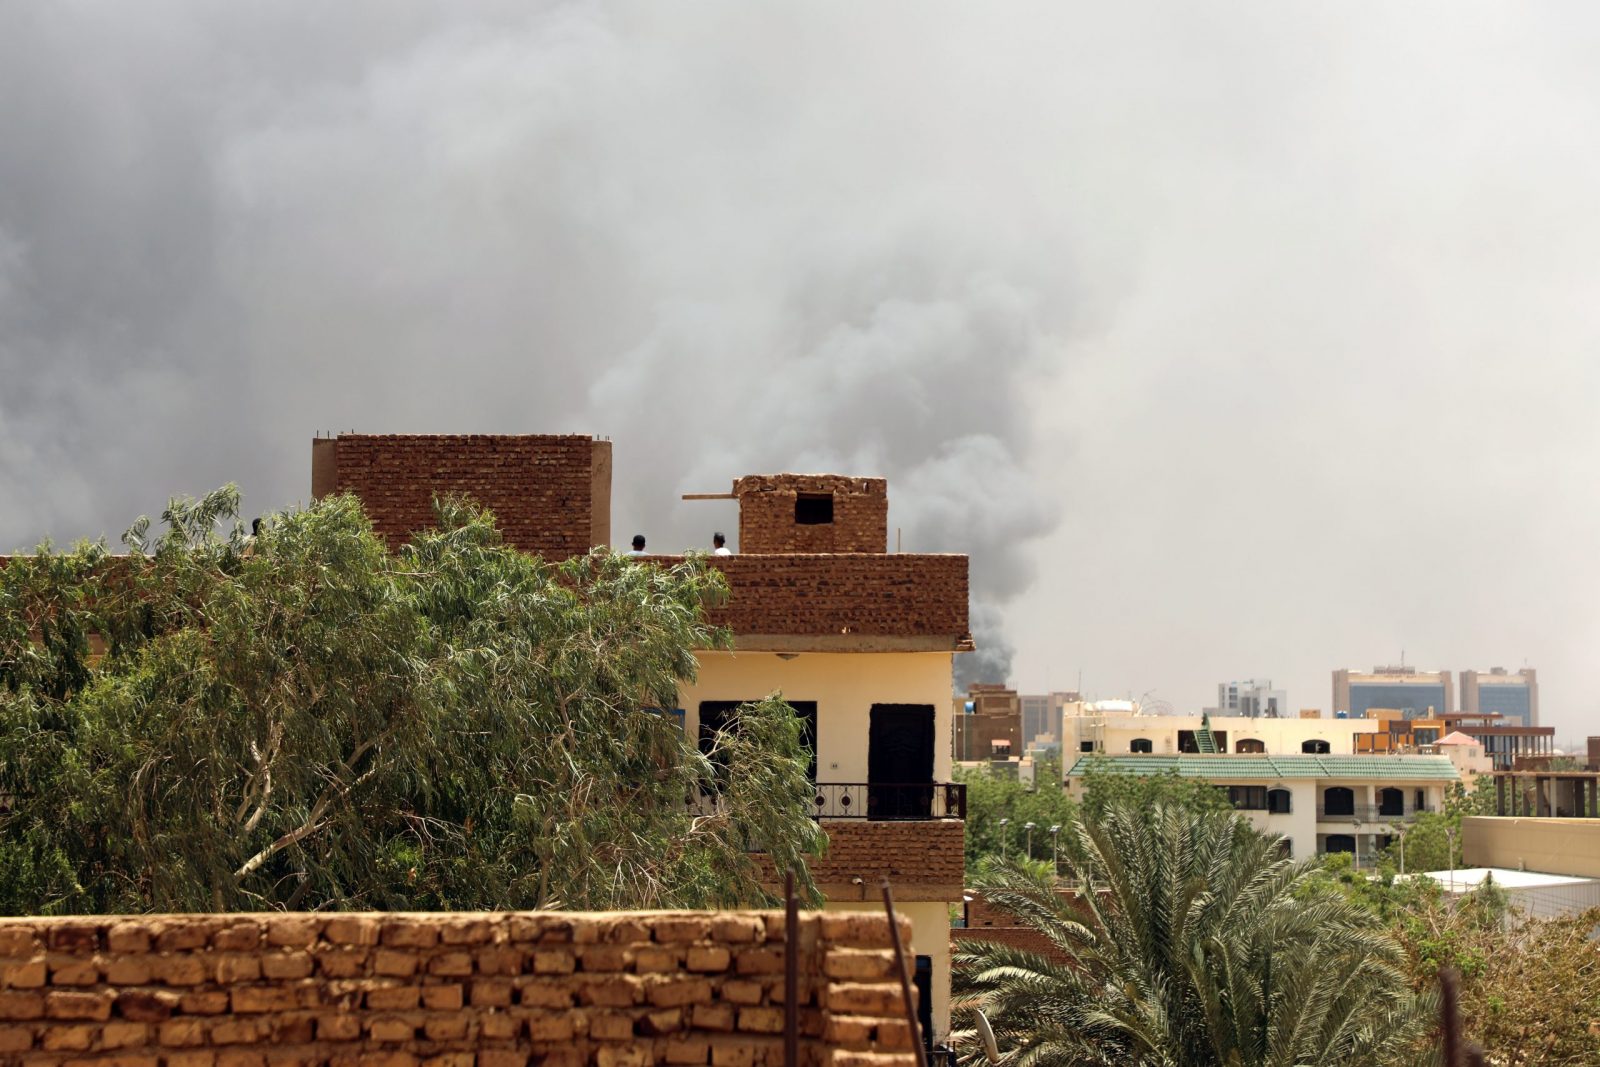 epa10573901 Smoke rises above buildings in Khartoum, Sudan, 15 April 2023. Gunfire and explosions were reported in Khartoum after a power struggle erupted between the army led by army Chief General Abdel Fattah al-Burhan and the paramilitaries of the Rapid Support Forces (RSF) led by General Mohamed Hamdan Dagalo.  EPA/MOHND AWAD